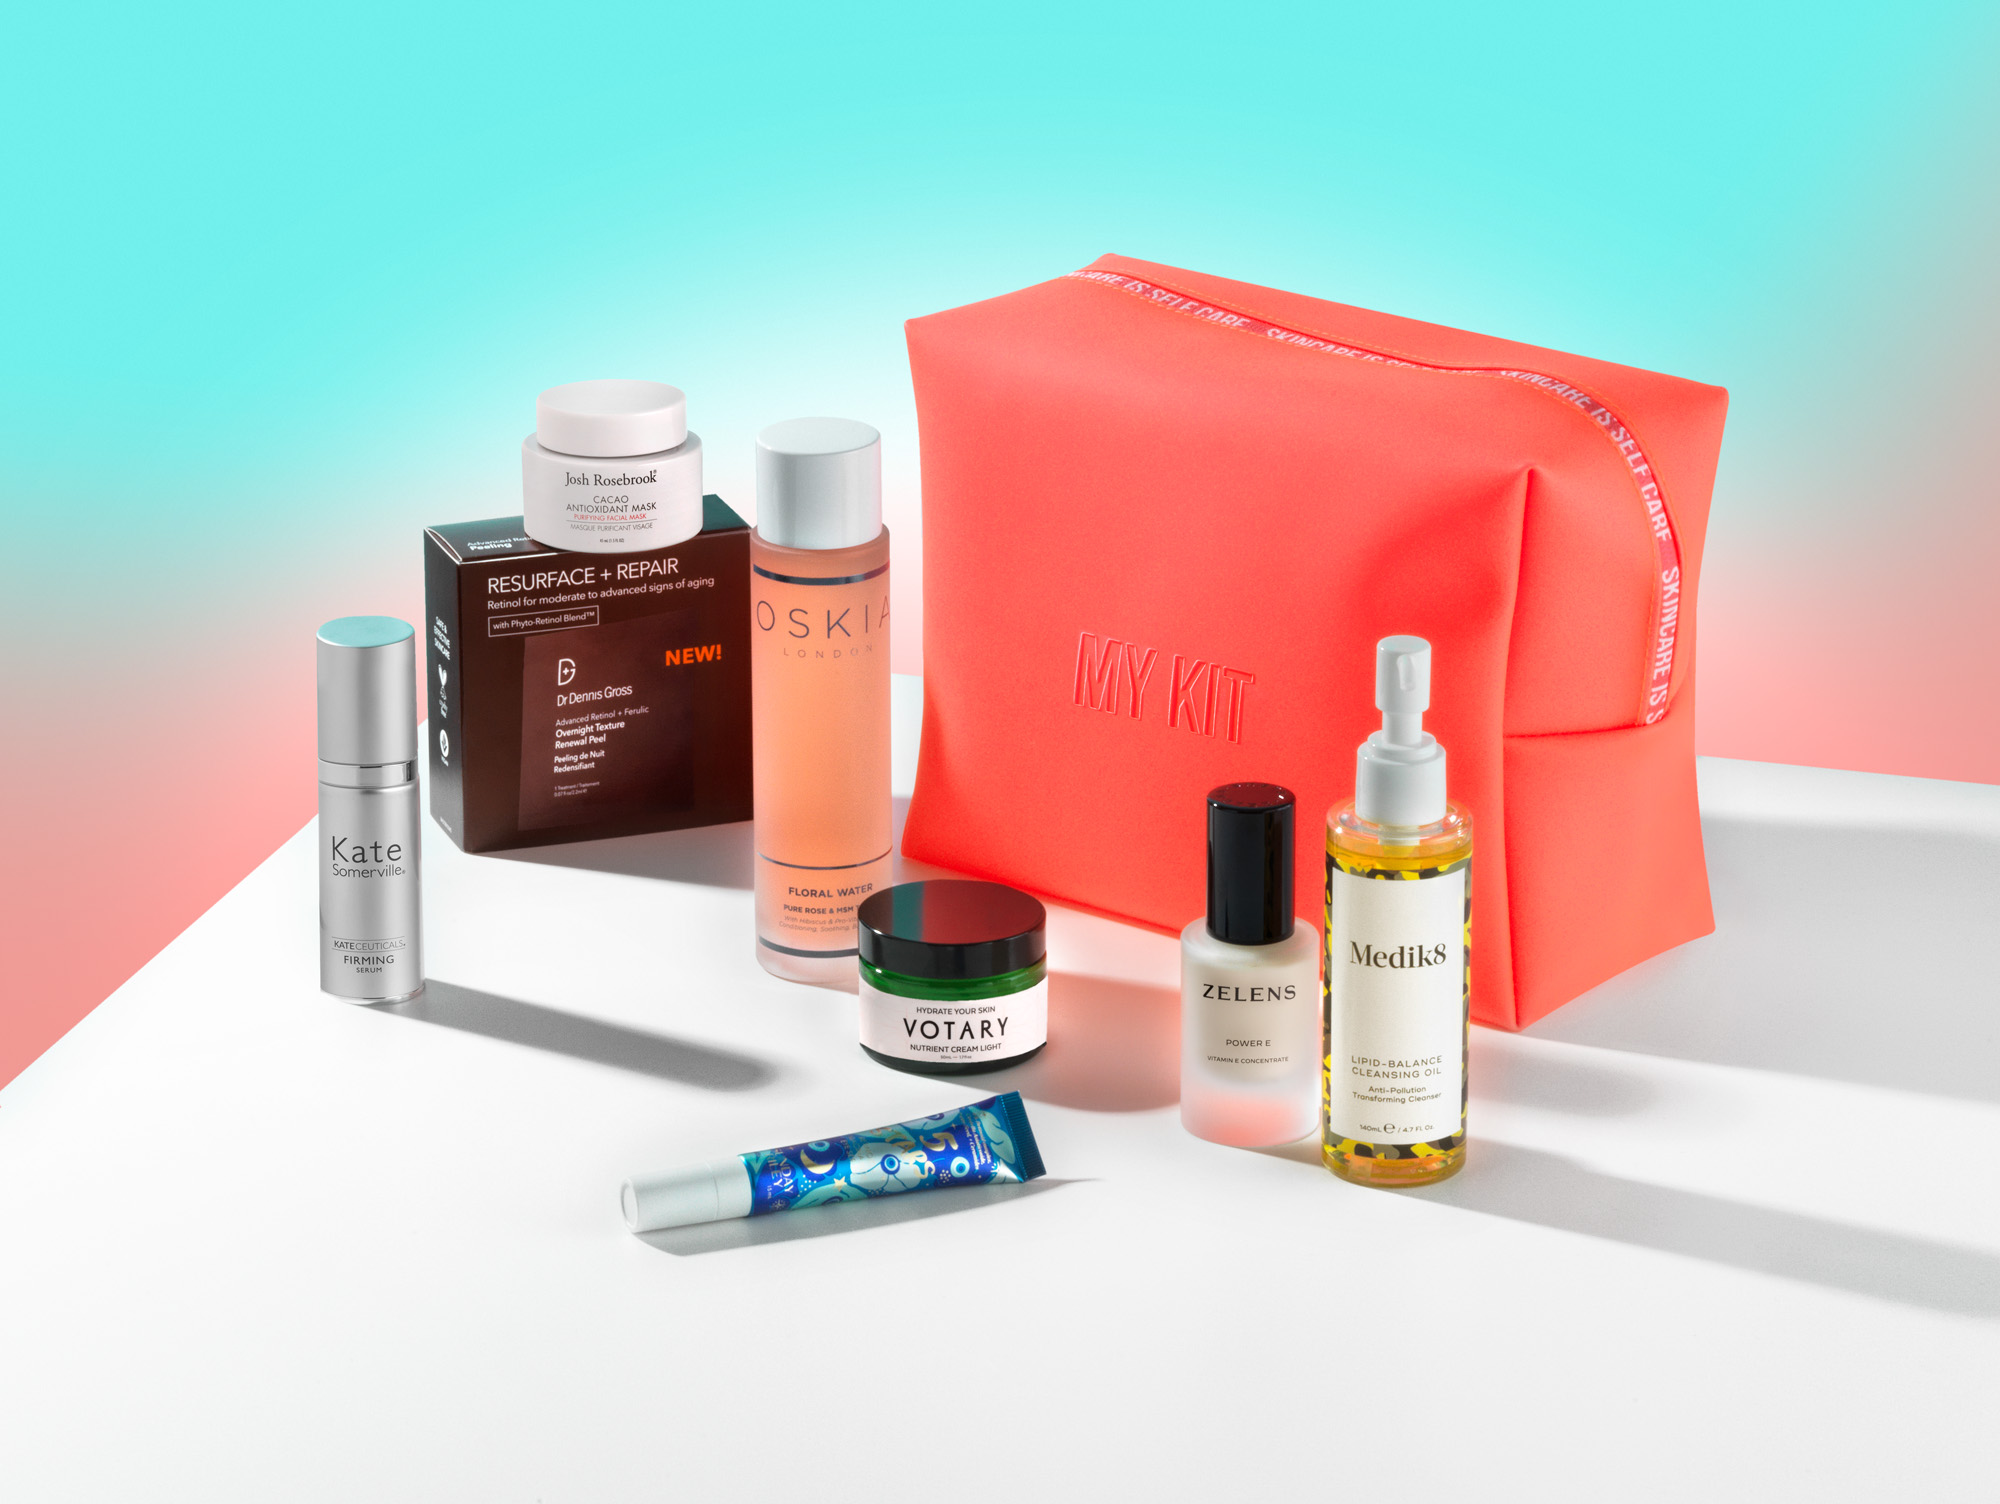 The Fresh Face Kit Brand Offers